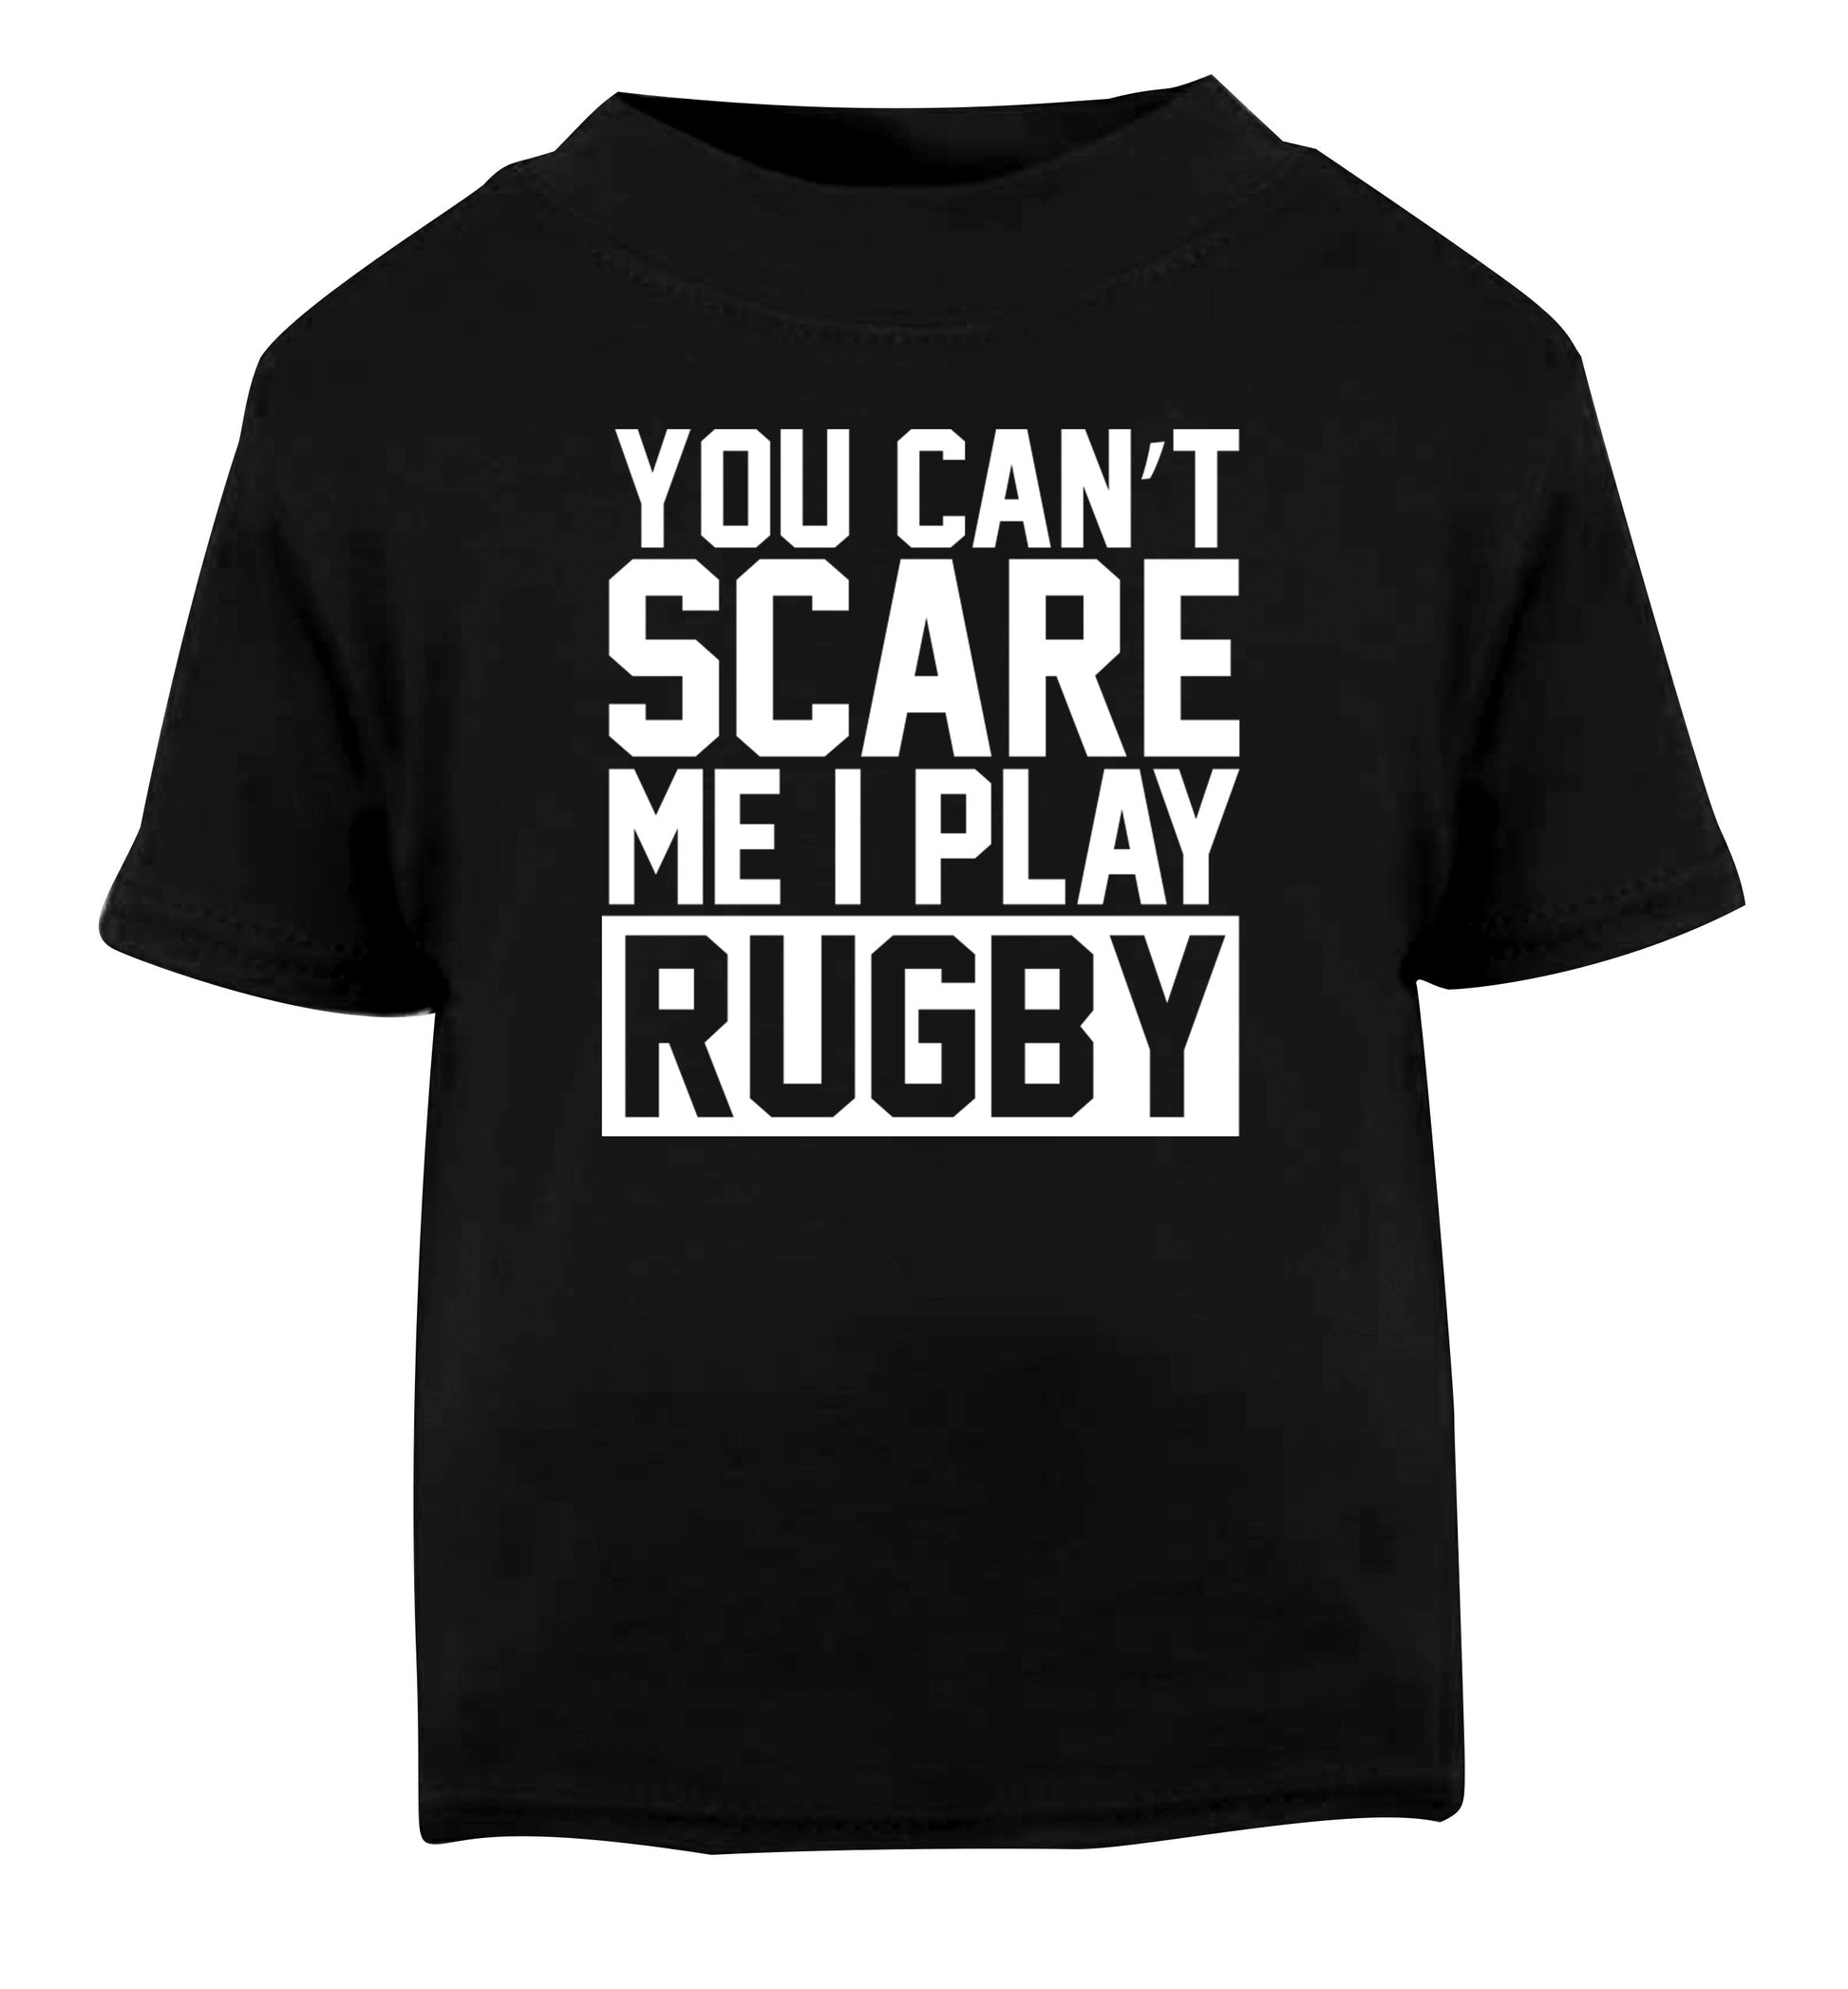 You can't scare me I play rugby Black Baby Toddler Tshirt 2 years